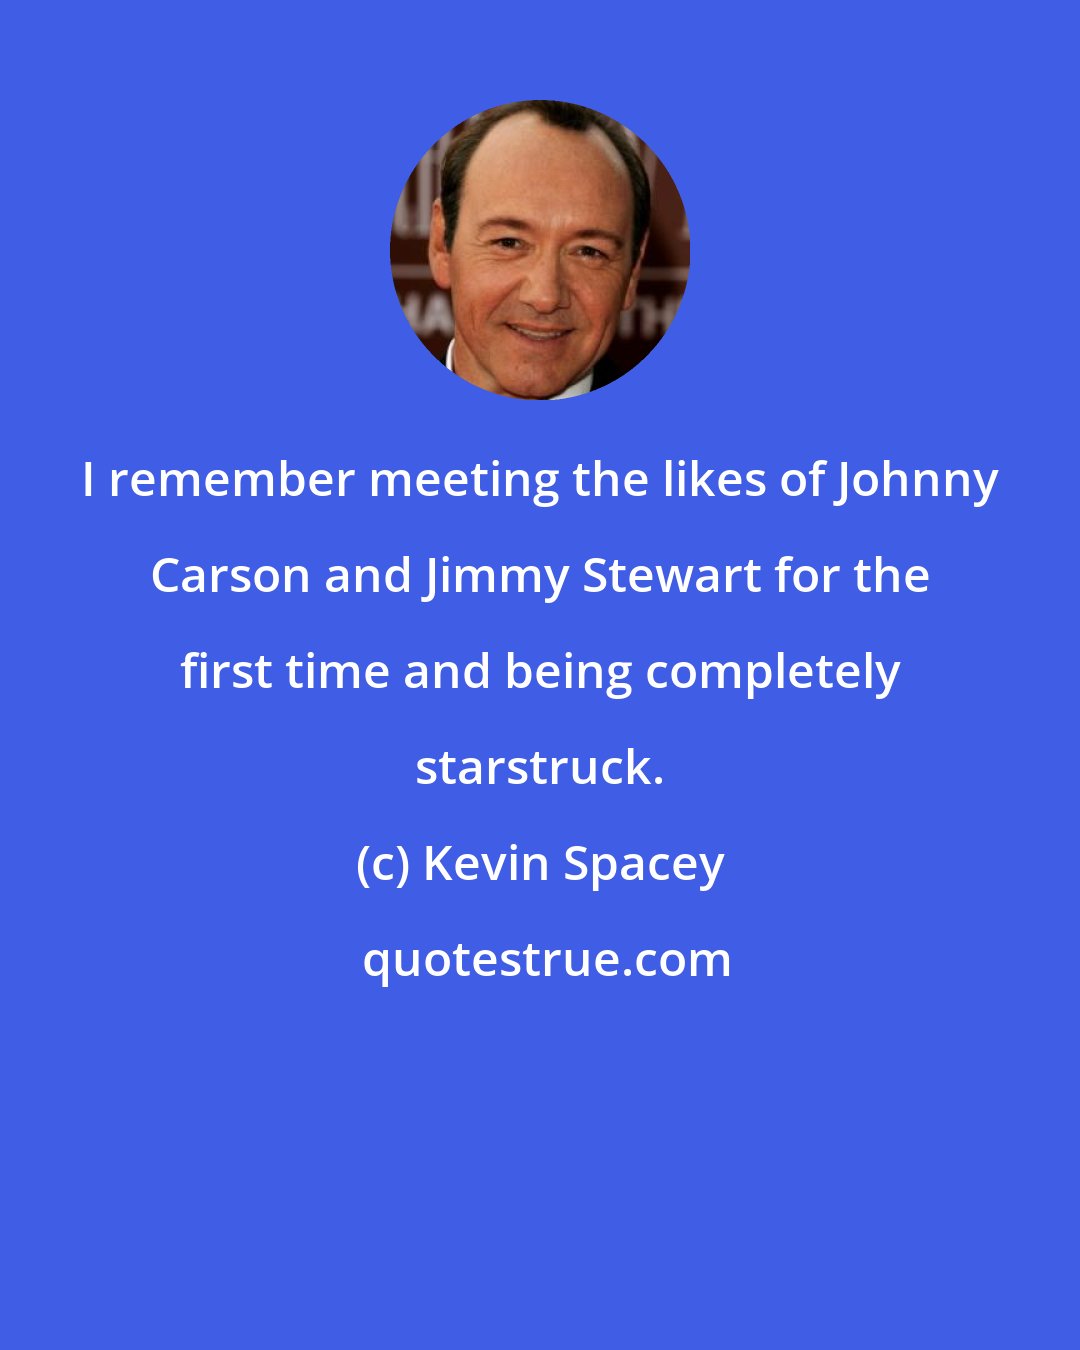 Kevin Spacey: I remember meeting the likes of Johnny Carson and Jimmy Stewart for the first time and being completely starstruck.